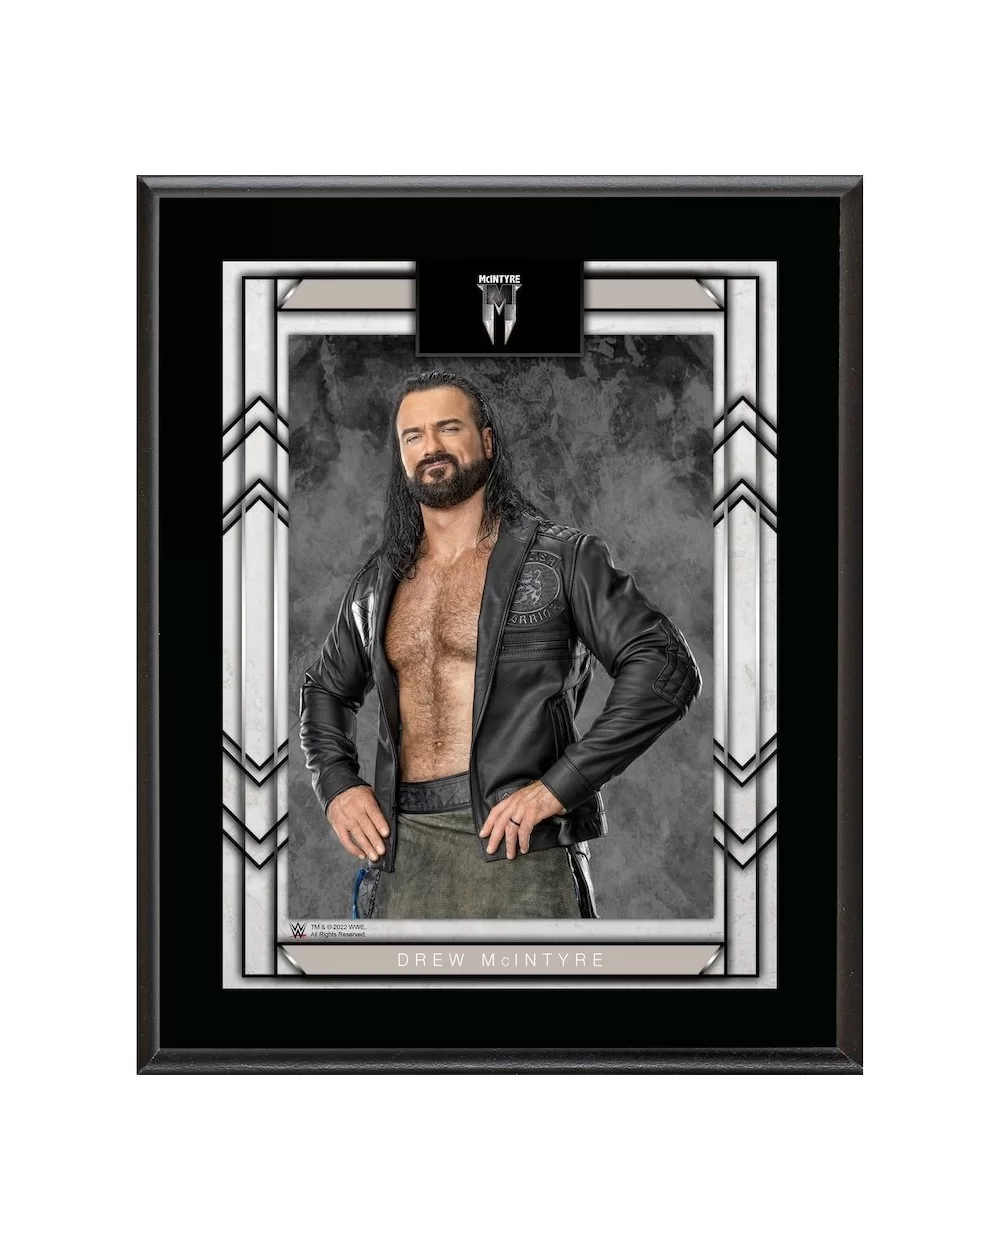 Drew McIntyre 10.5" x 13" Sublimated Plaque $7.68 Home & Office